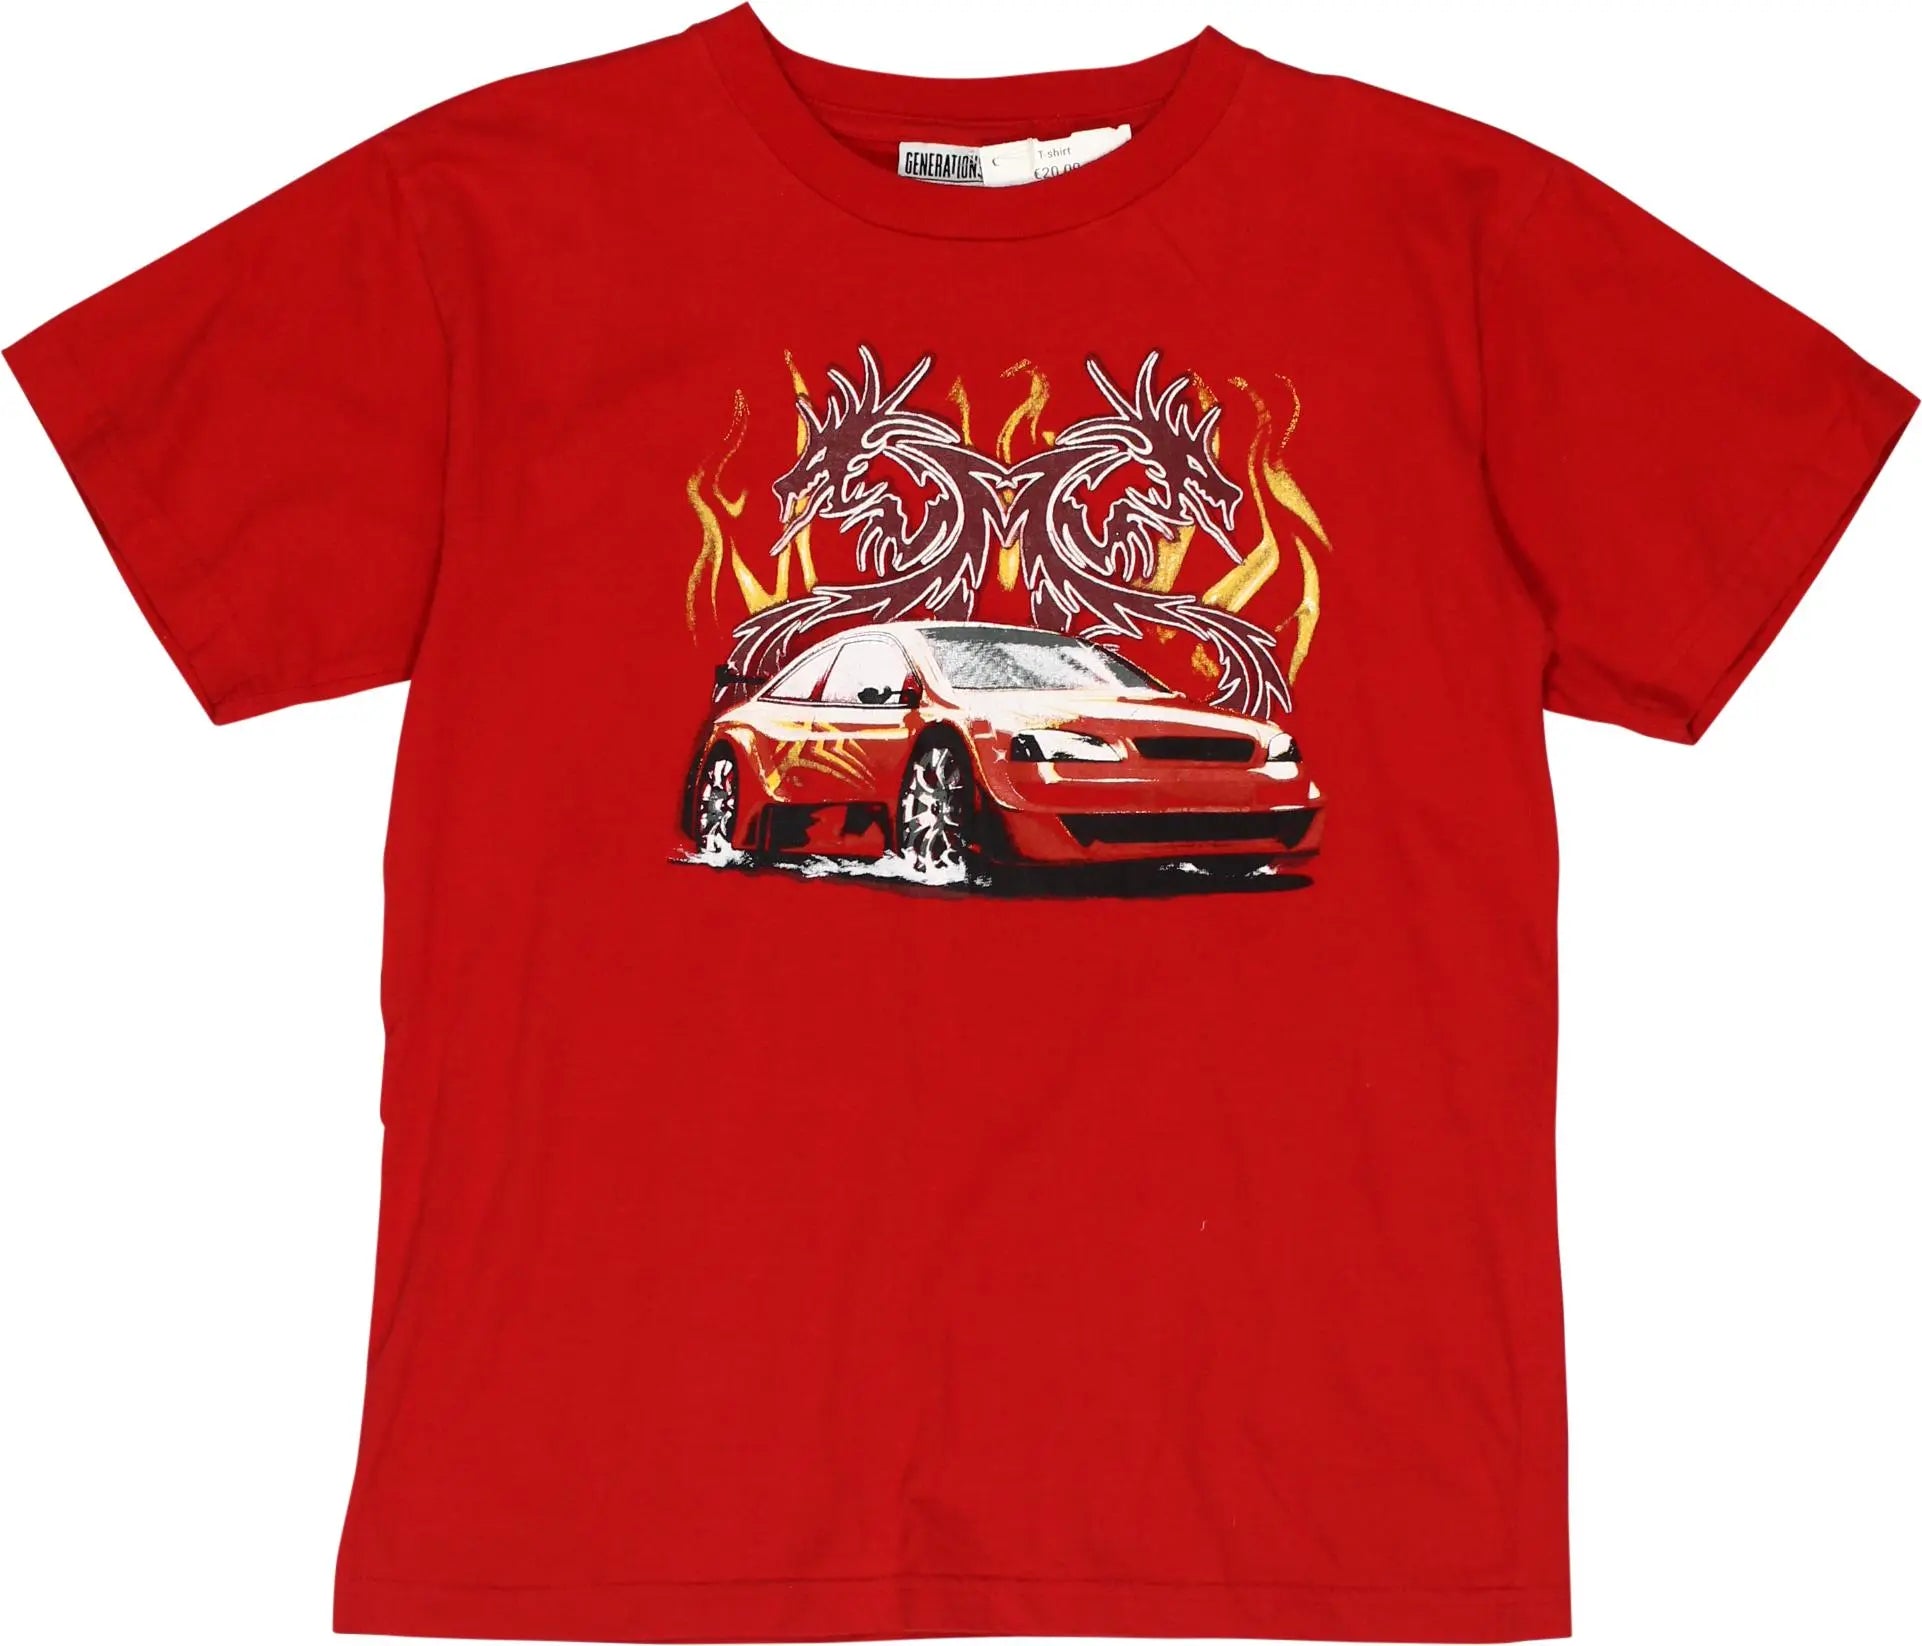 Generations - 00s T-Shirt wth Dragon and Car Print- ThriftTale.com - Vintage and second handclothing